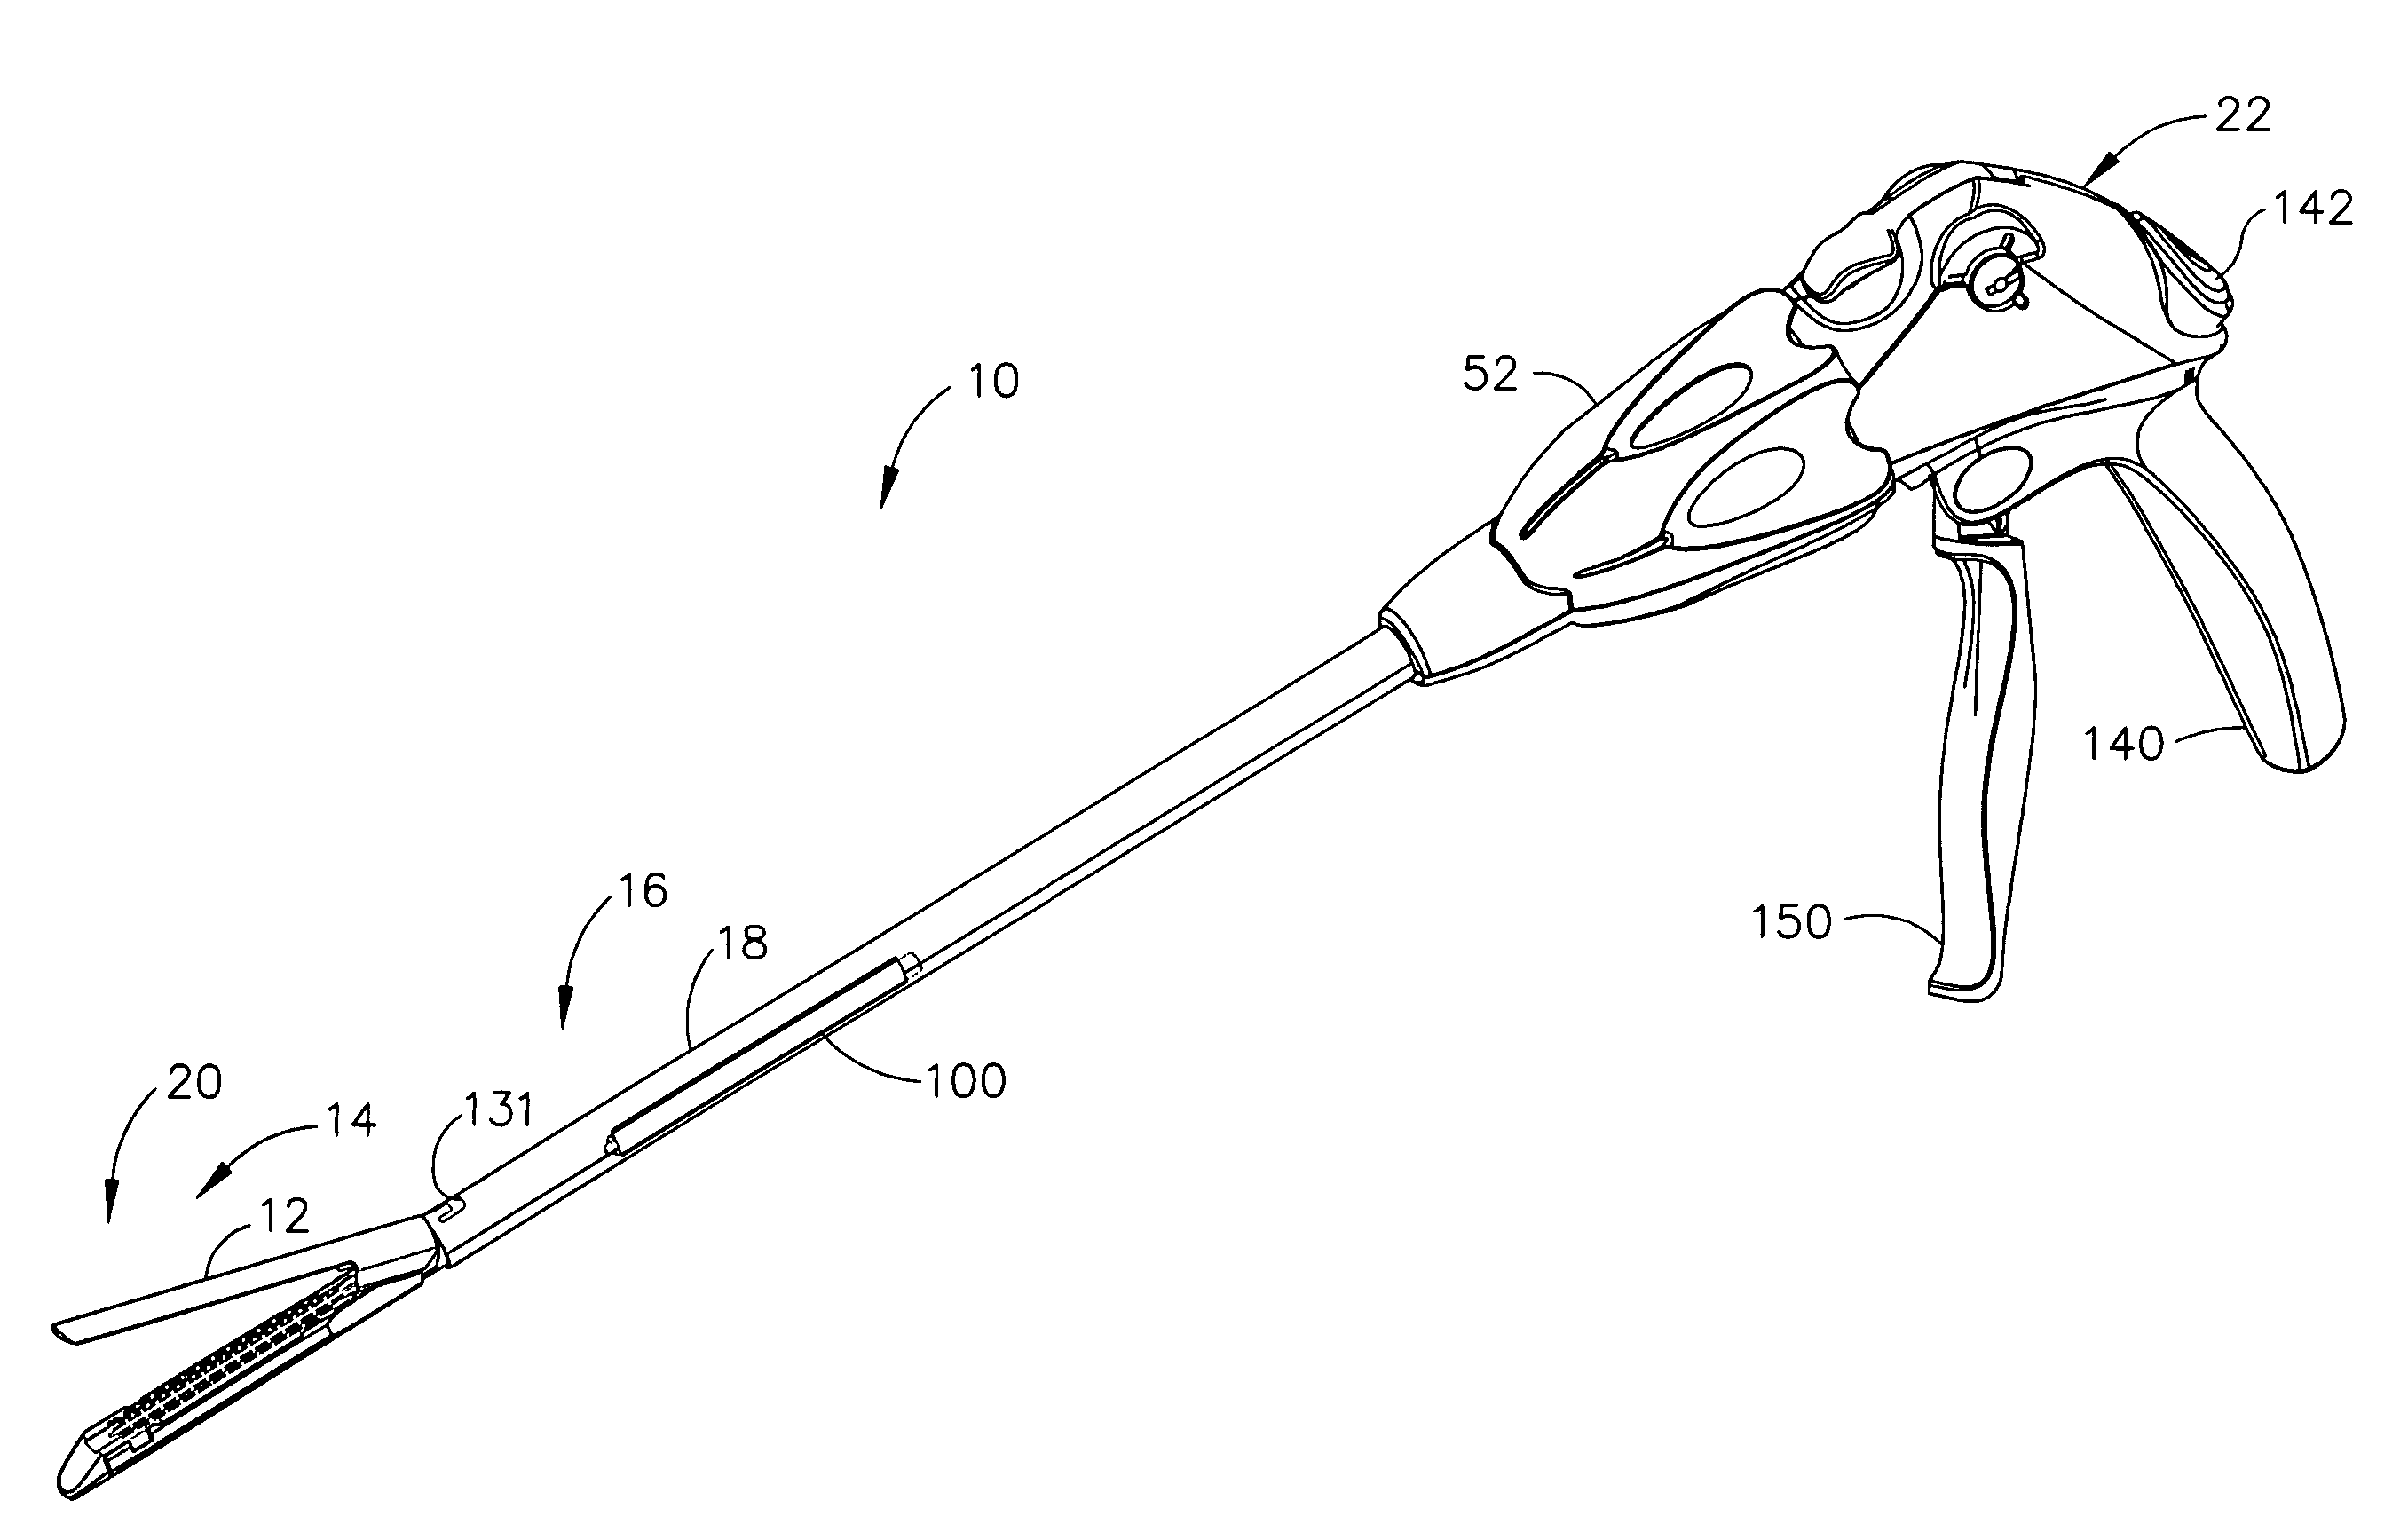 Surgical instrument having fluid actuated opposing jaws